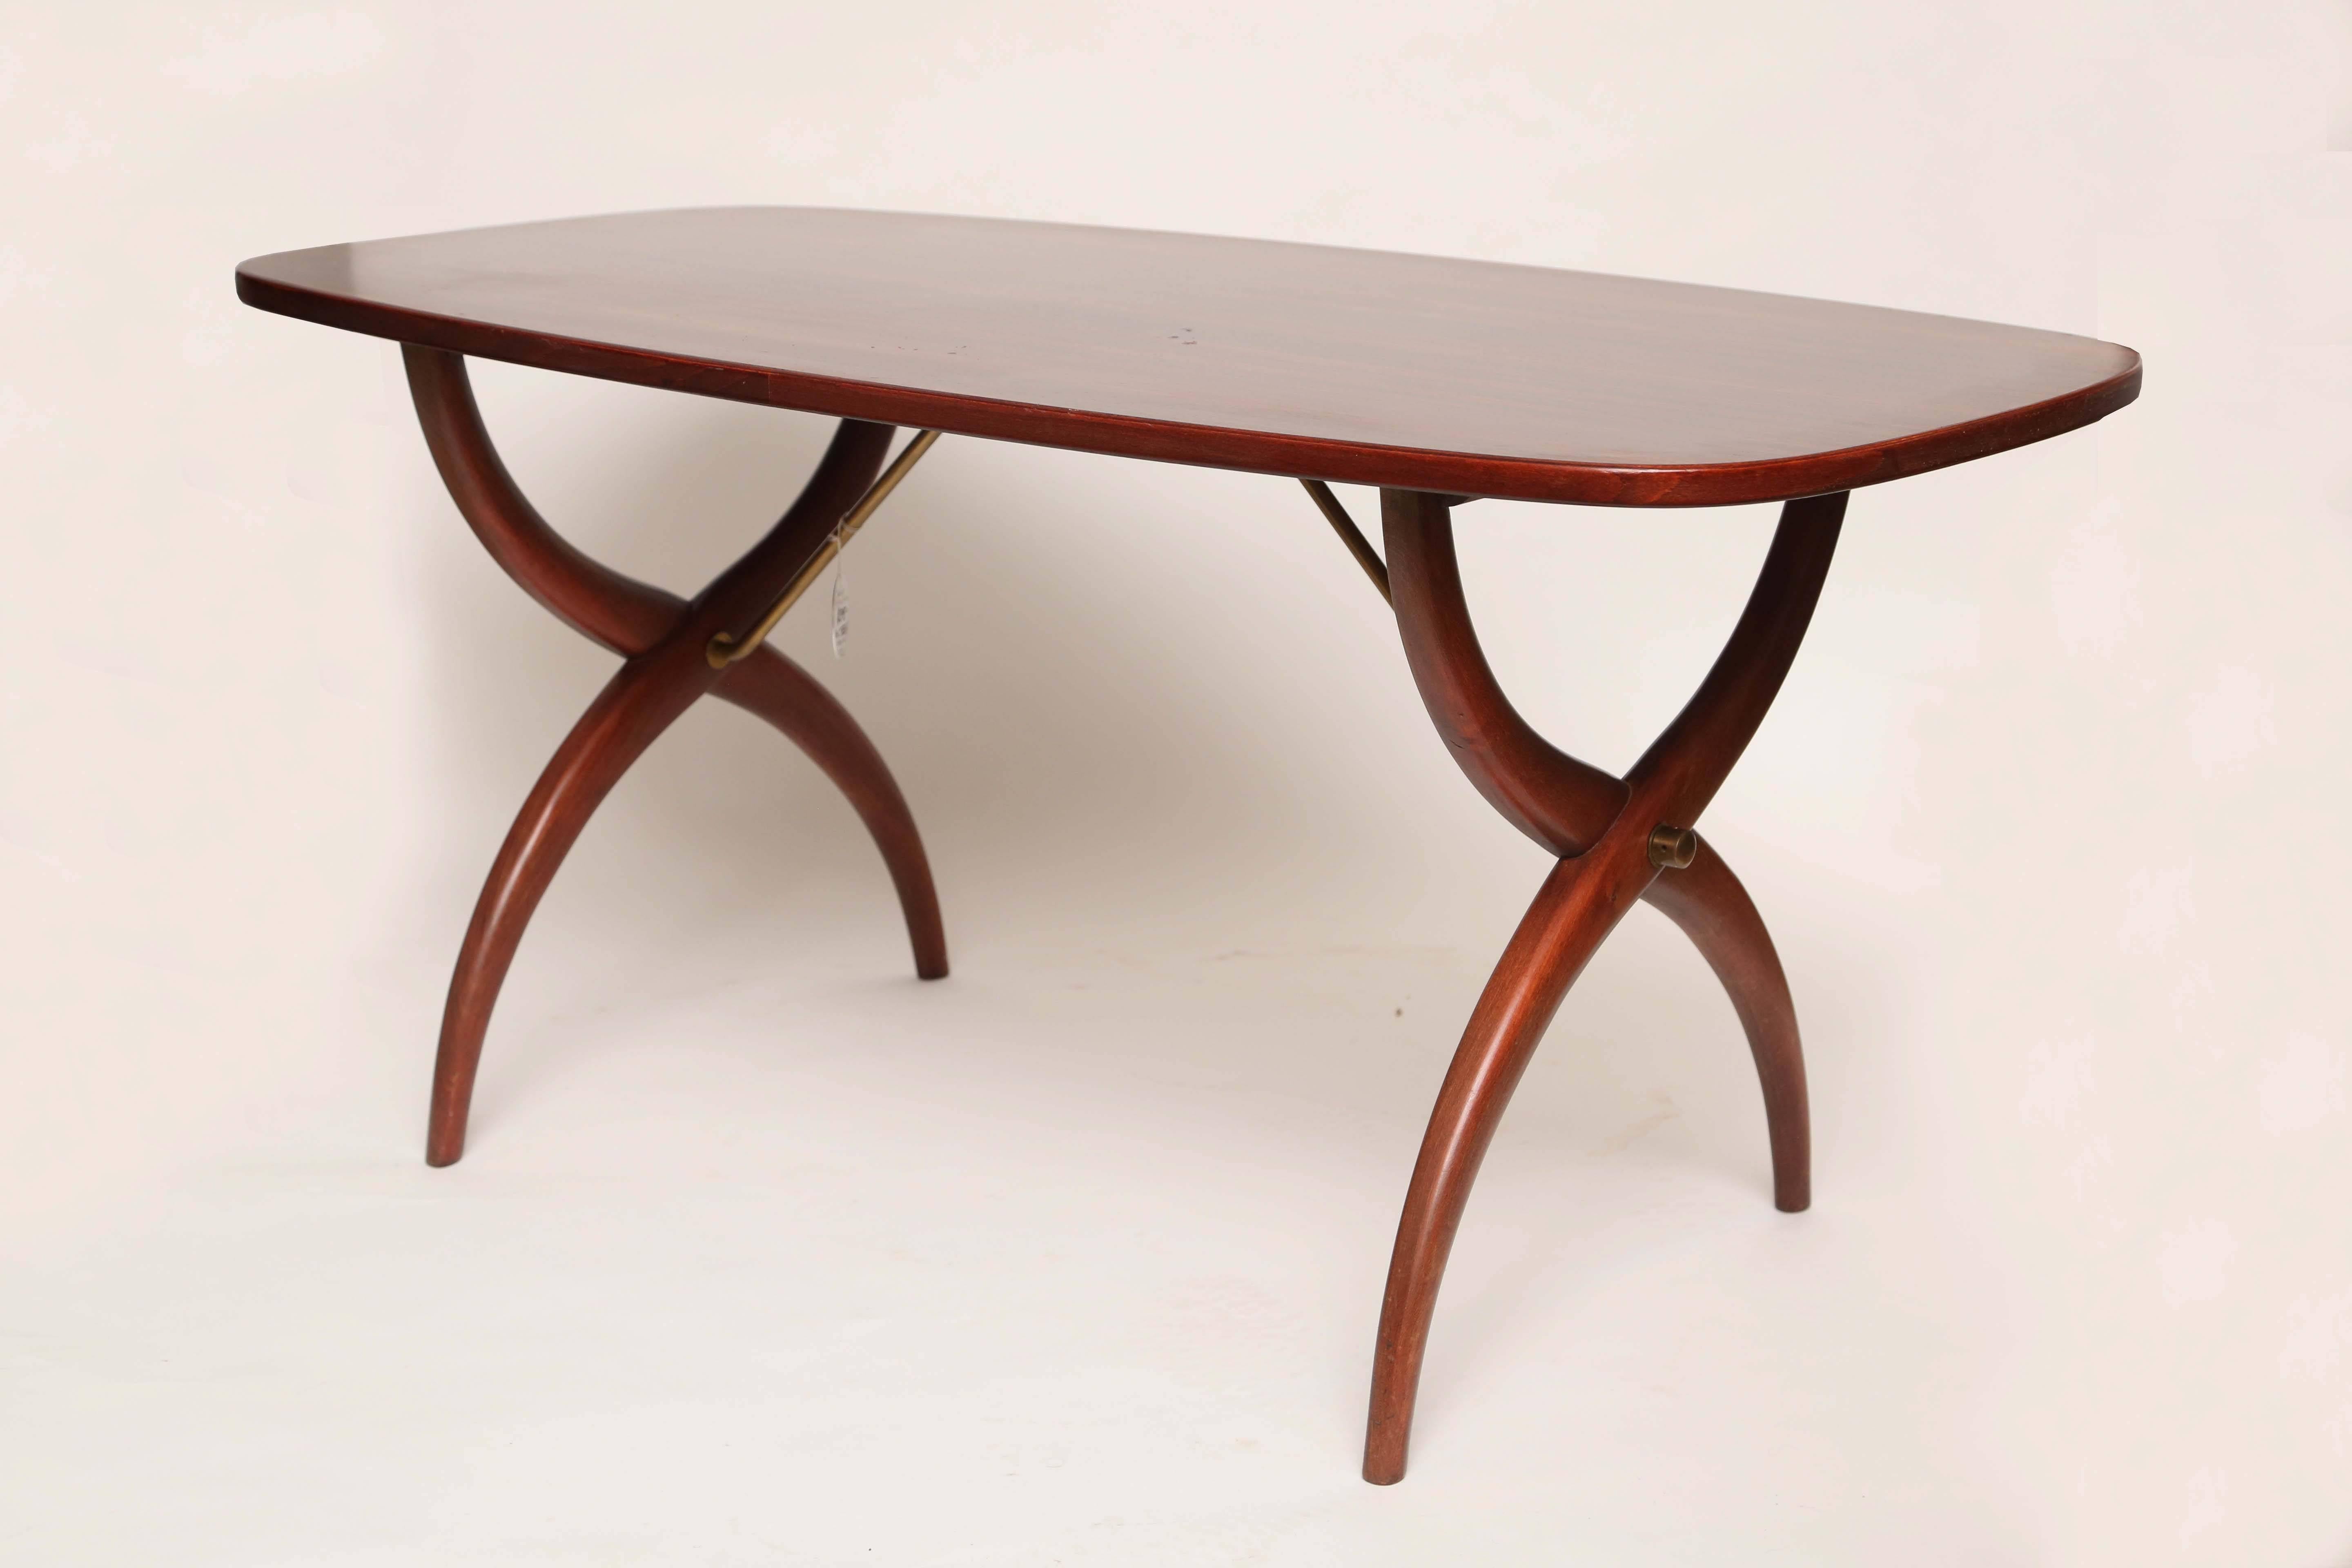 Gorgeous rosewood coffee table made by Westbergs designed by Yngve Ekström.